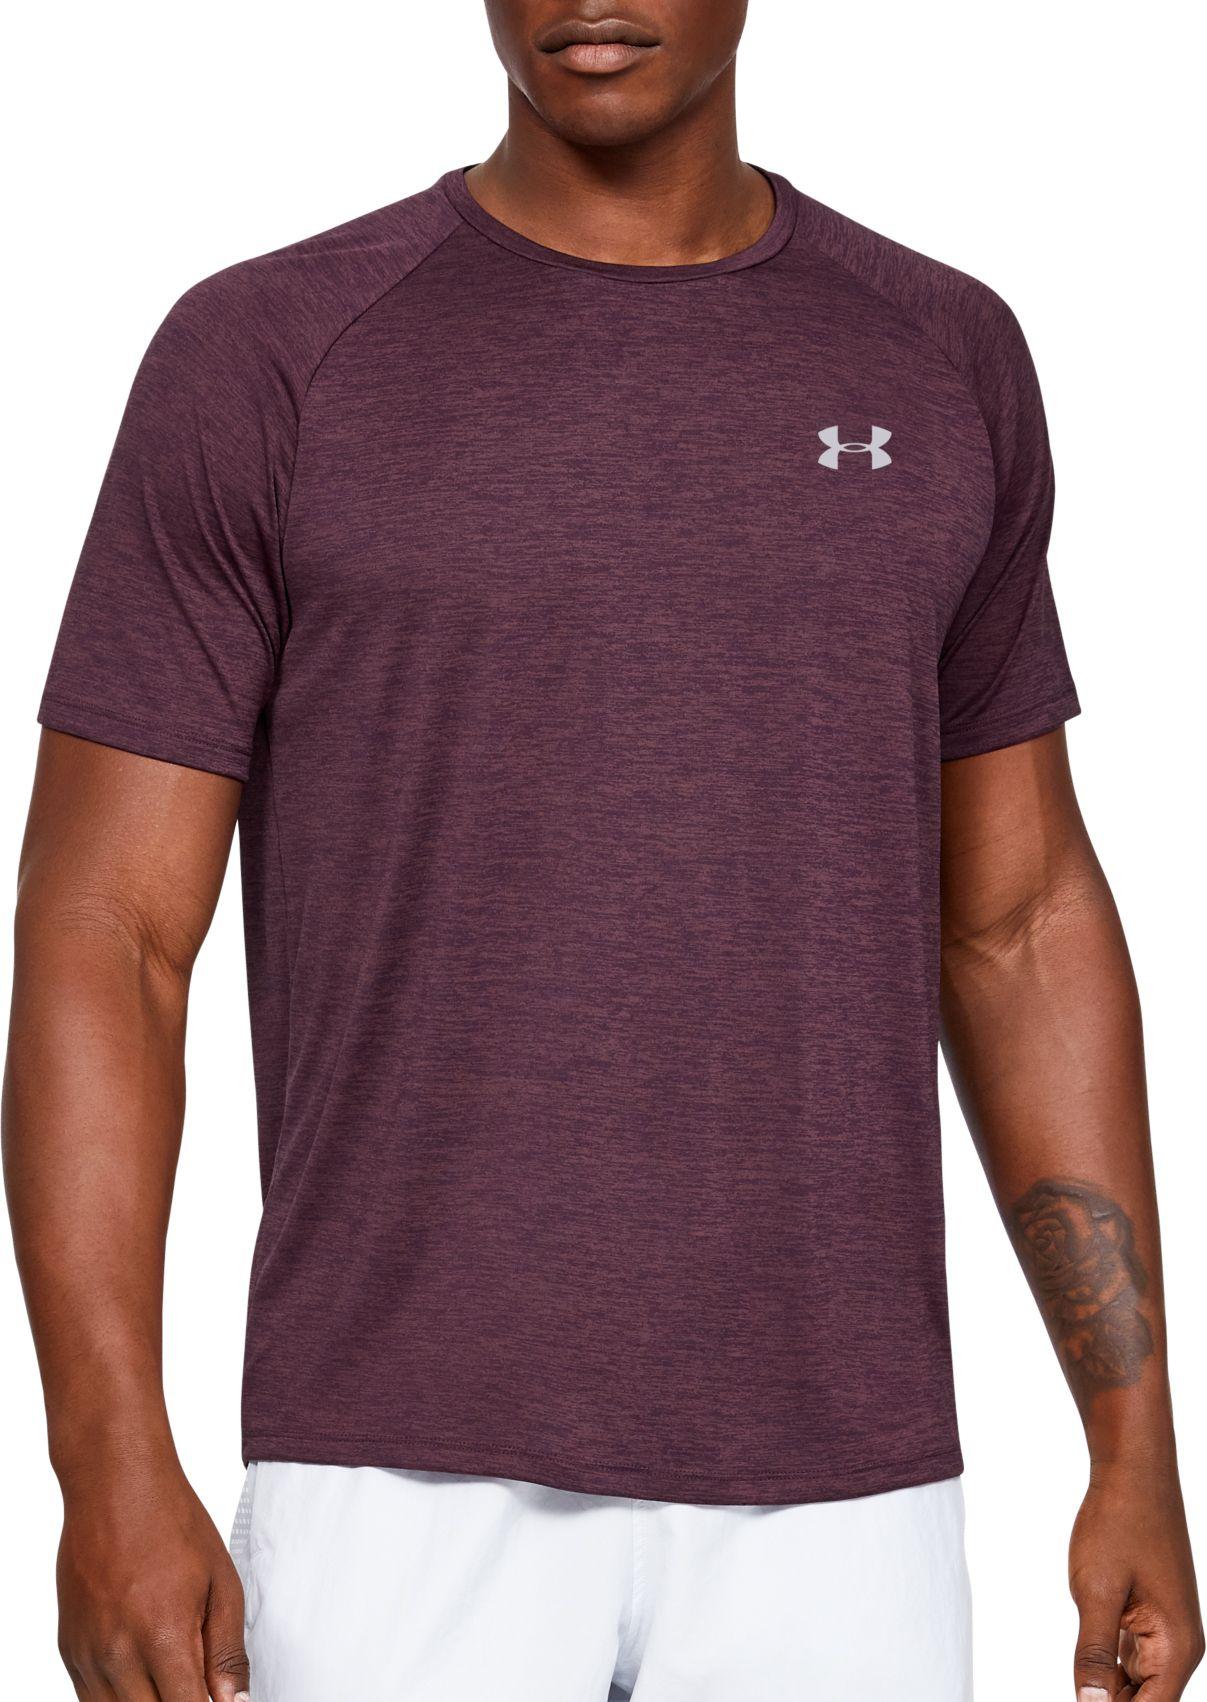 Under Armour Synthetic Techtm 2.0 T-shirt in Purple for Men - Lyst